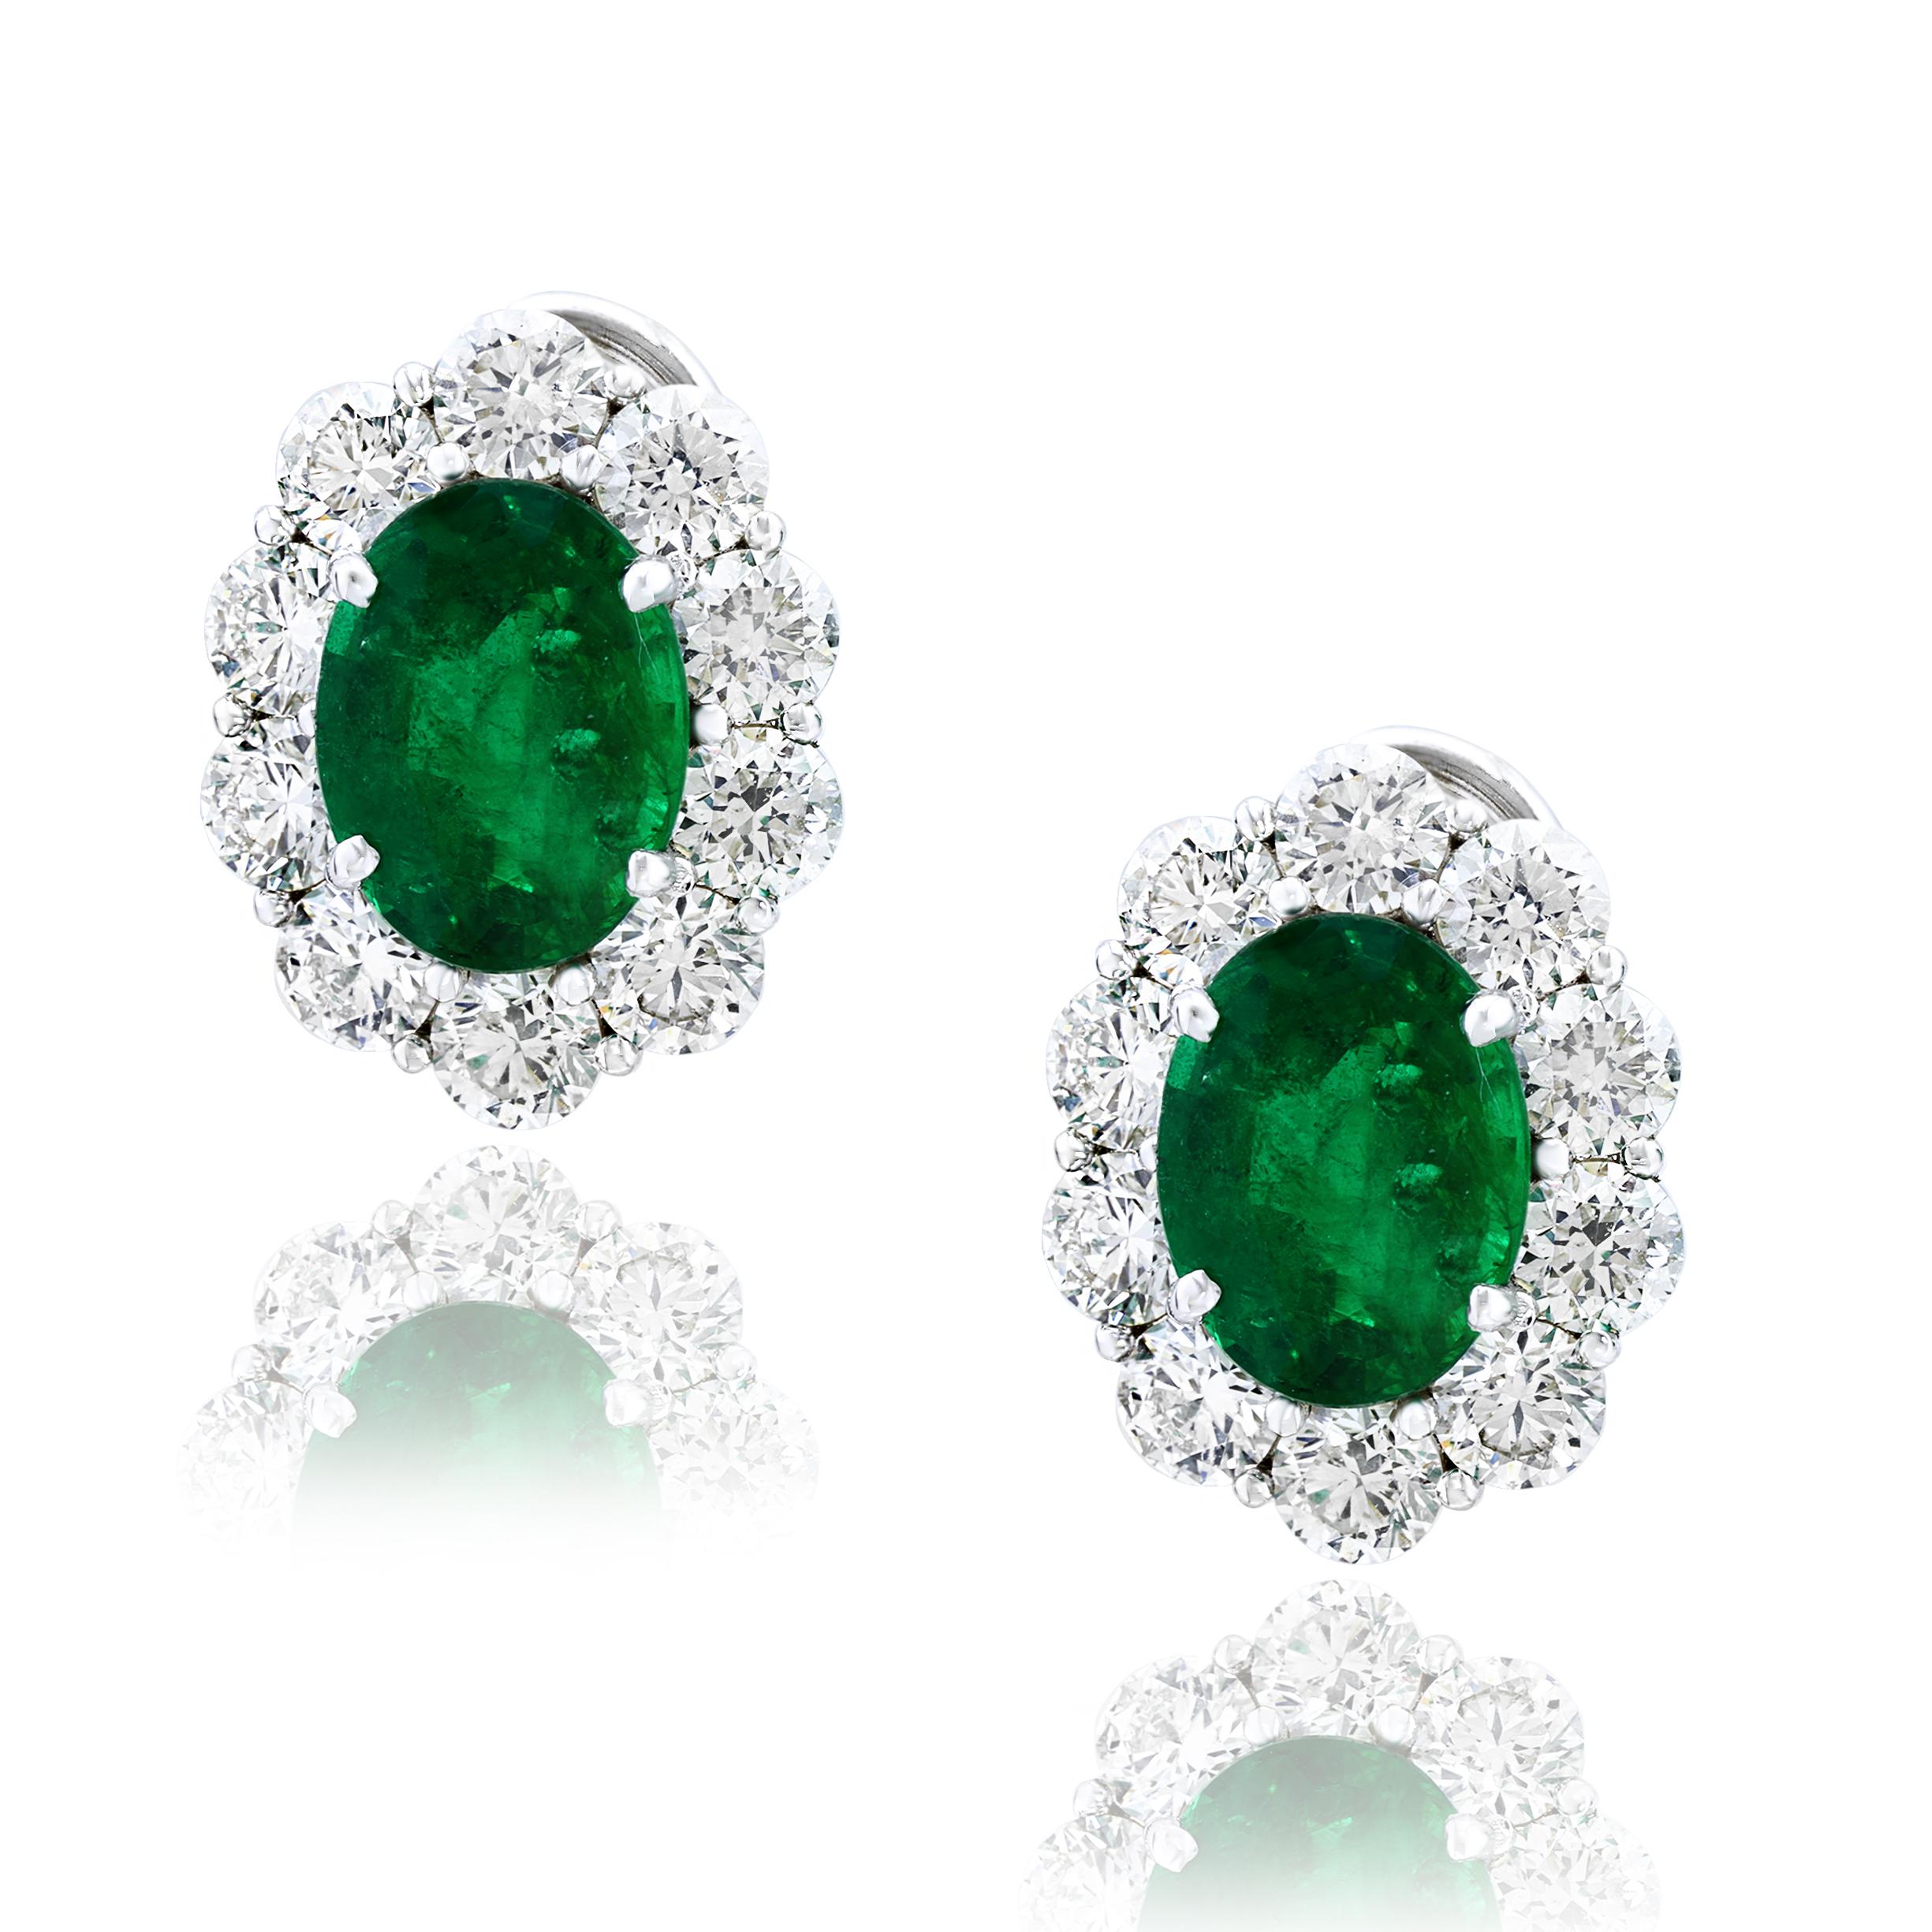 Showcasing two color-rich oval cut emeralds weighing 5.13 carats total, surrounded by a single row of round brilliant cut diamonds. 20 Accent diamonds weigh 3.86 carats total. Set in 18 karats white gold. Omega Clip with the post.

Style available